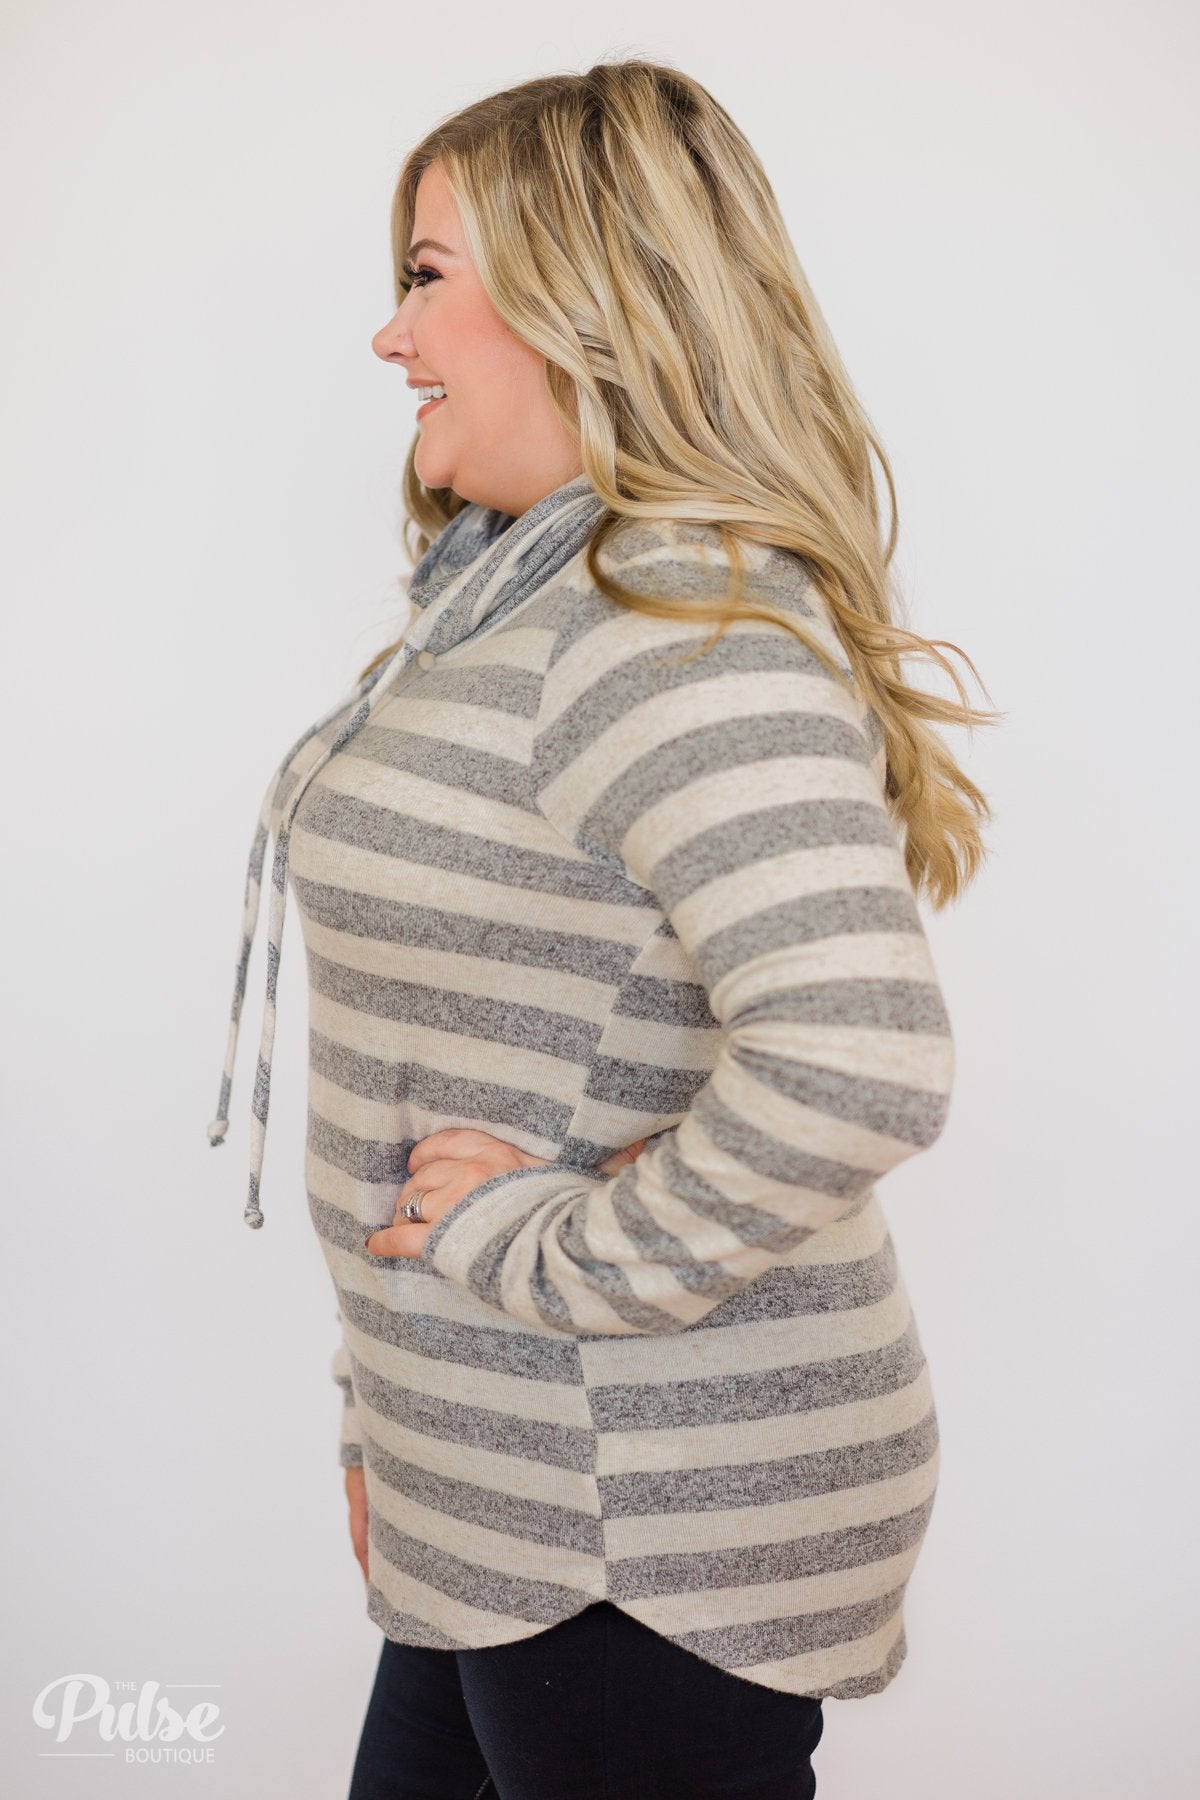 Striped Cowl Neck Top- Grey & Oatmeal